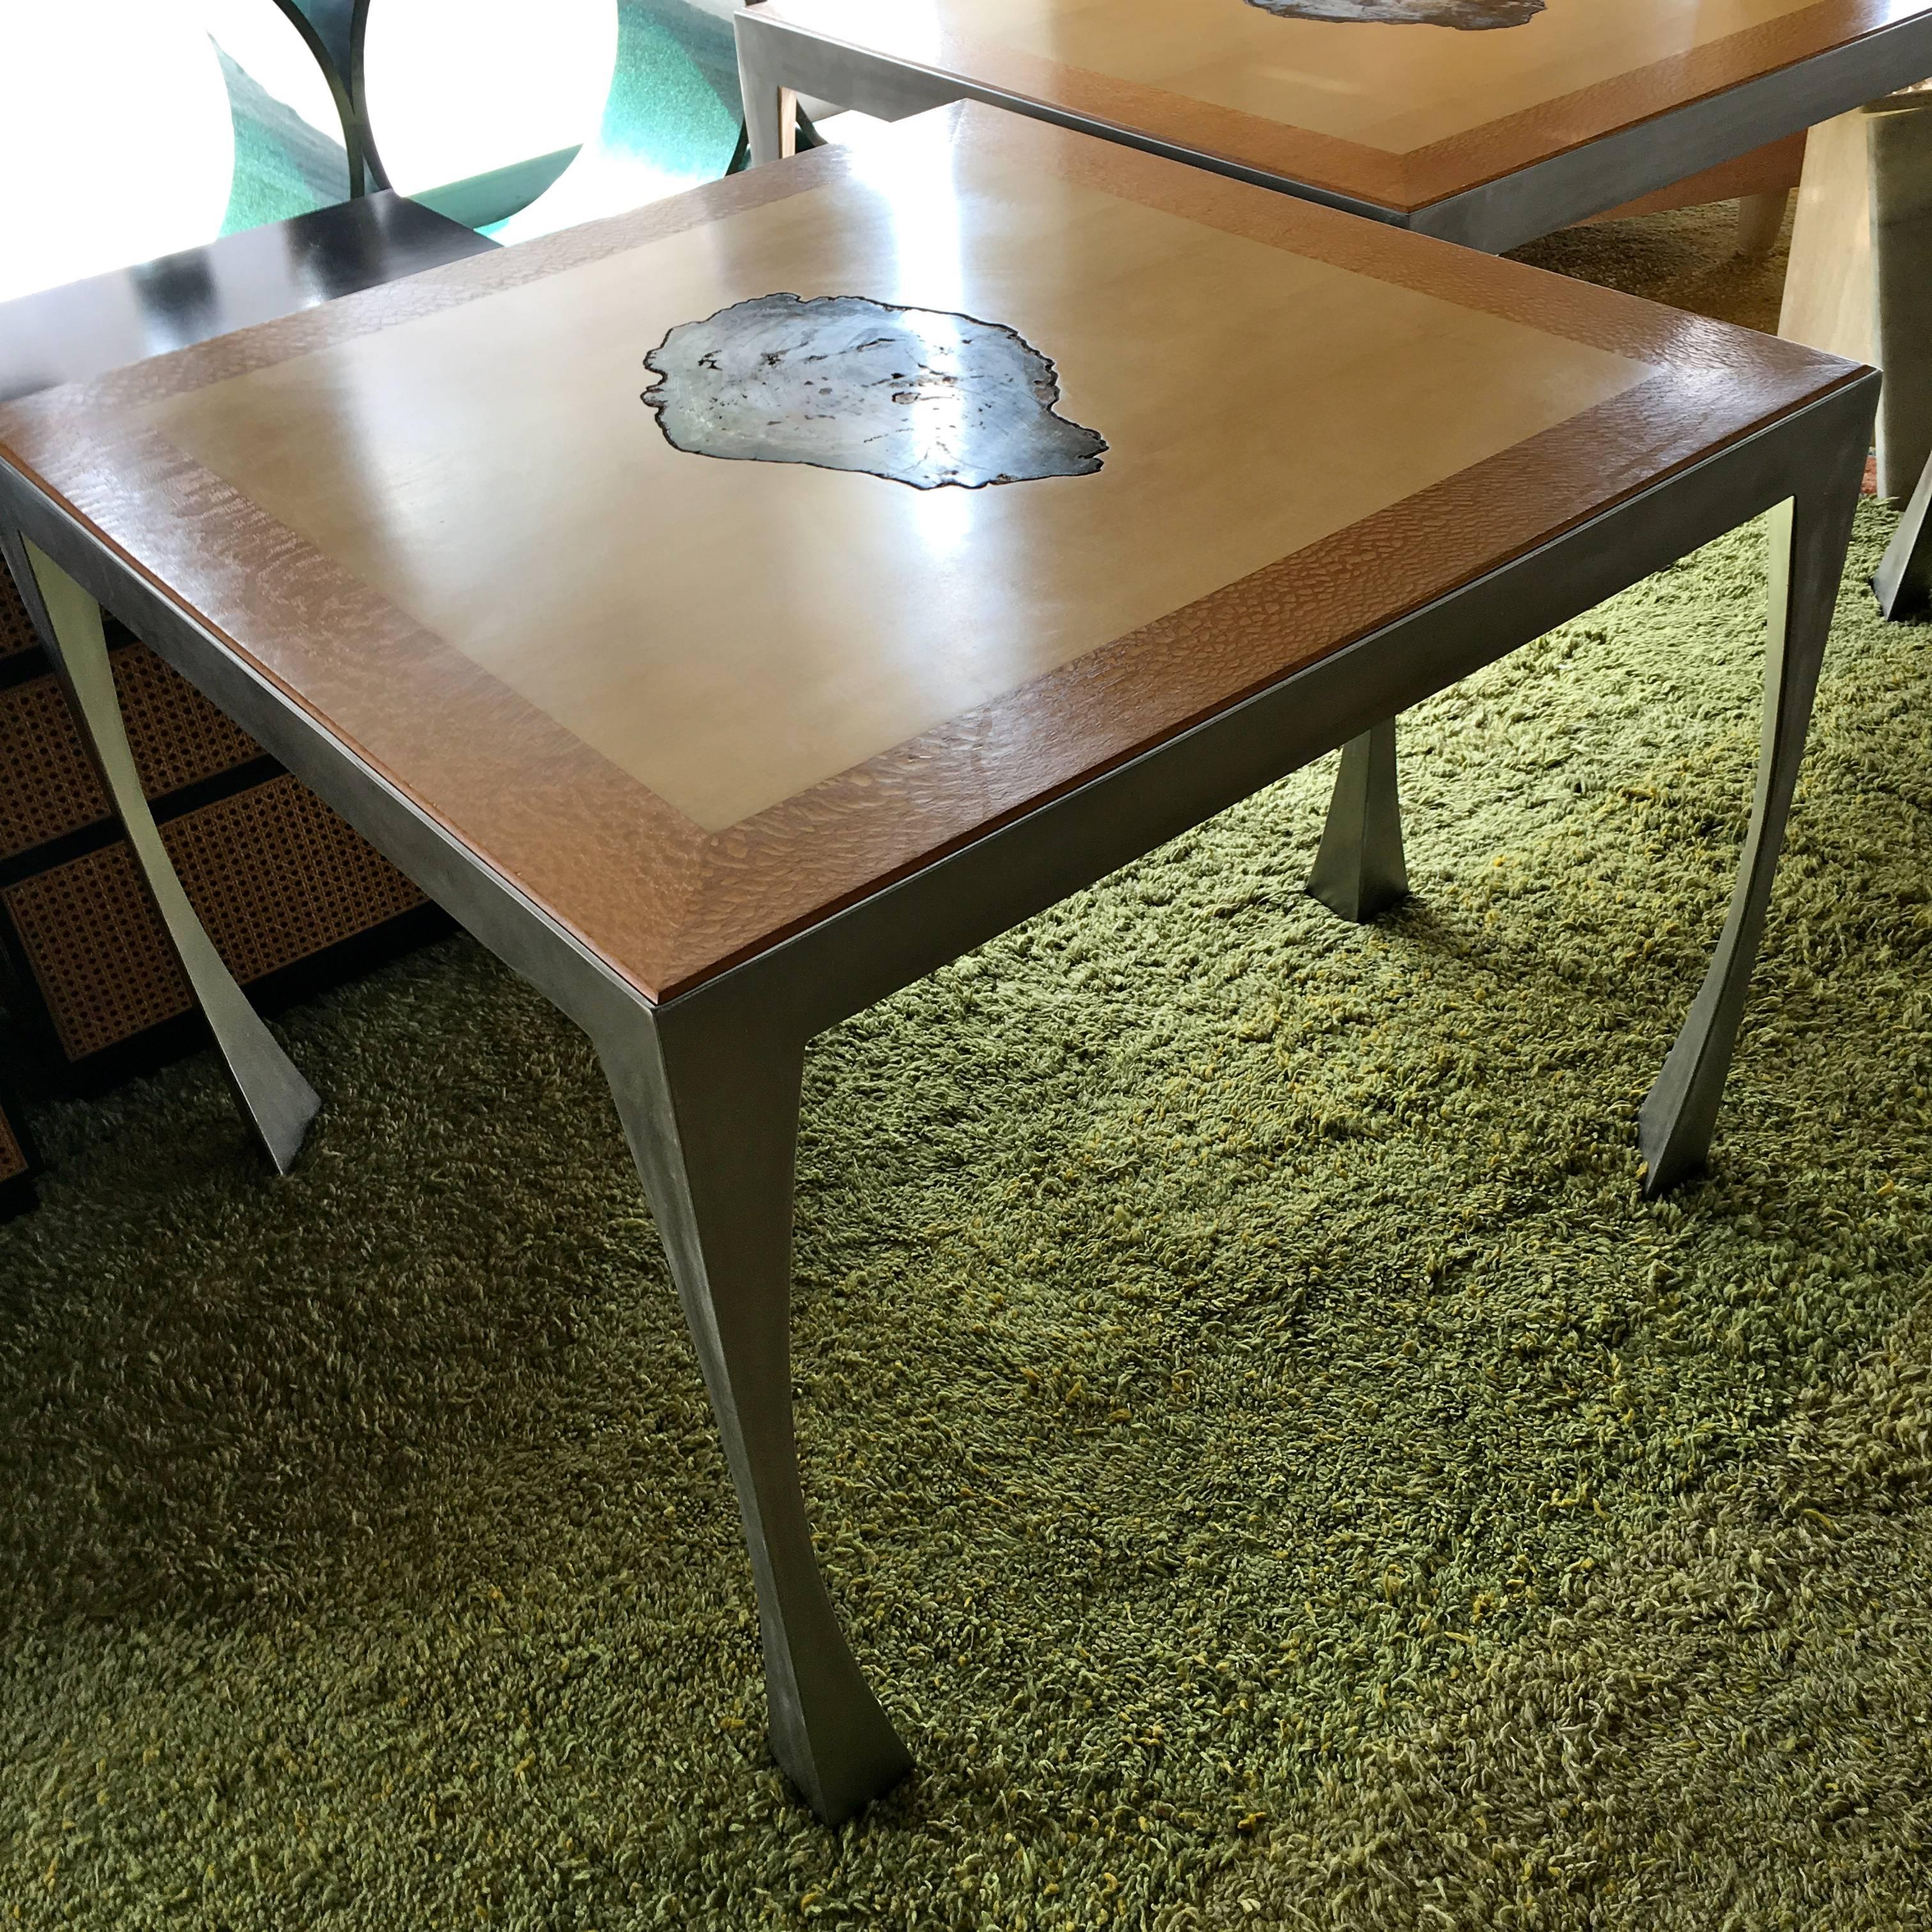 This pair of very well made tables were custom made by the architect of a very uber contemporary/modern Bighorn Country Club Residence in the early 1990s. They are perfectly inset with a slice of beautiful naturally colored petrified wood in the